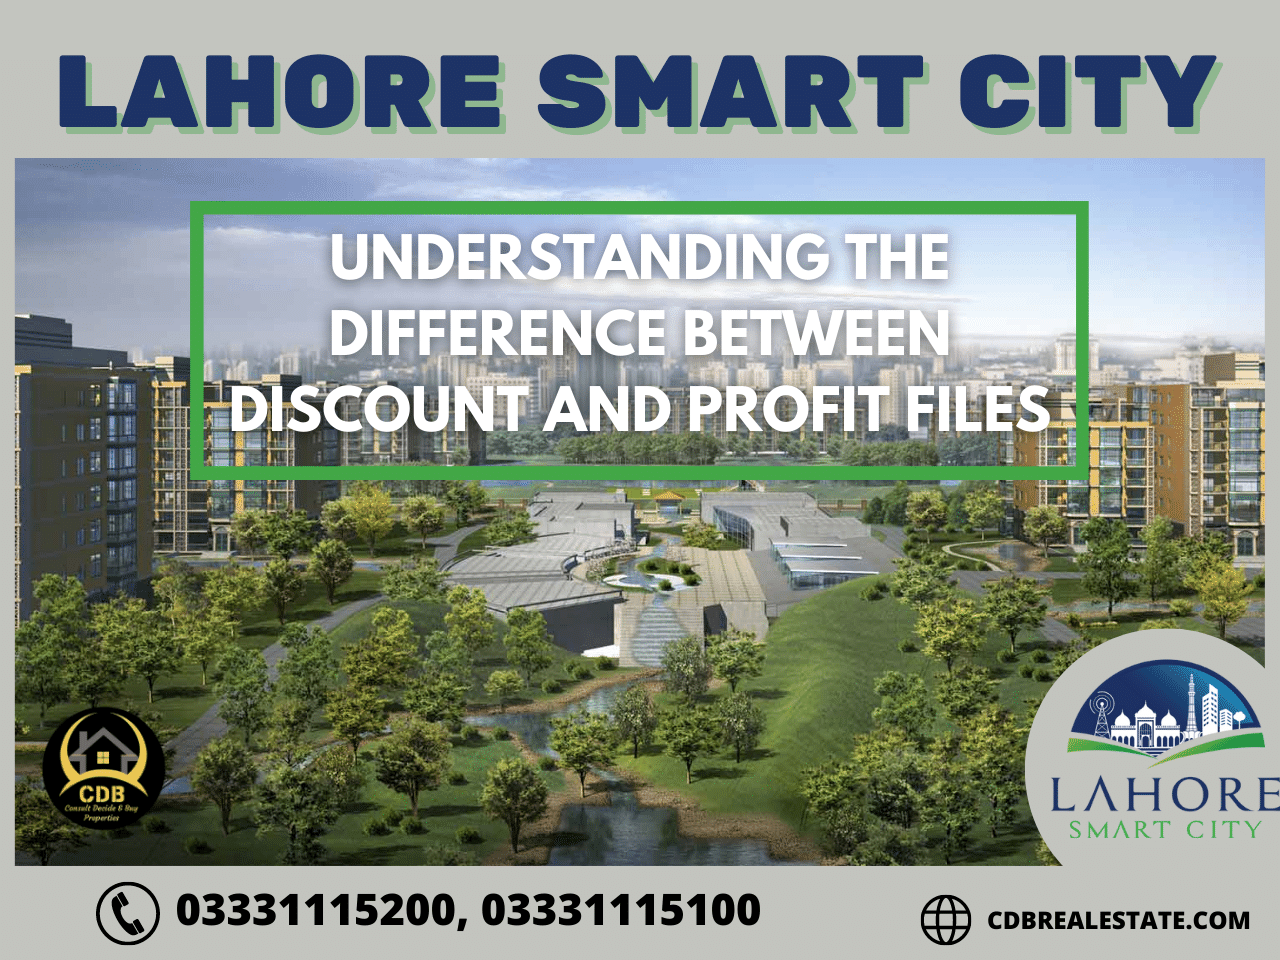 Lahore Smart City: Understanding the Difference Between Discount and Profit Files